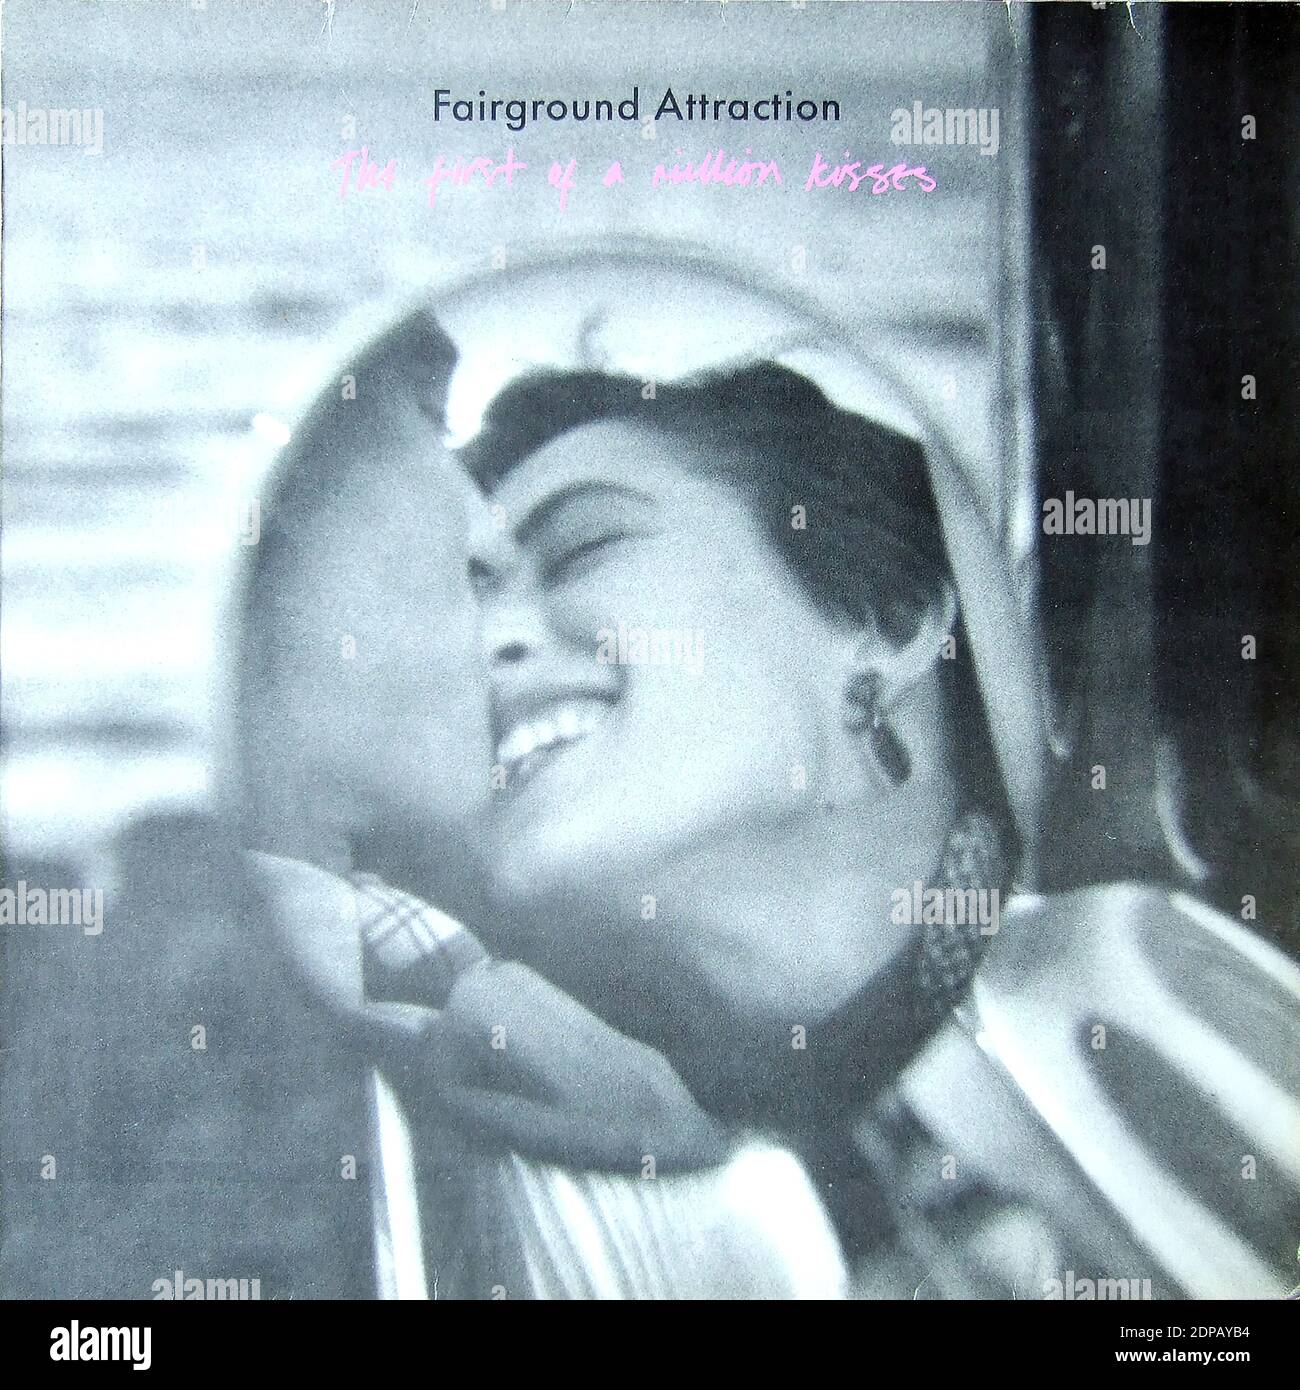 Fairground Attraction - The first of a Million Kisses - Vintage vinyl album cover Stock Photo